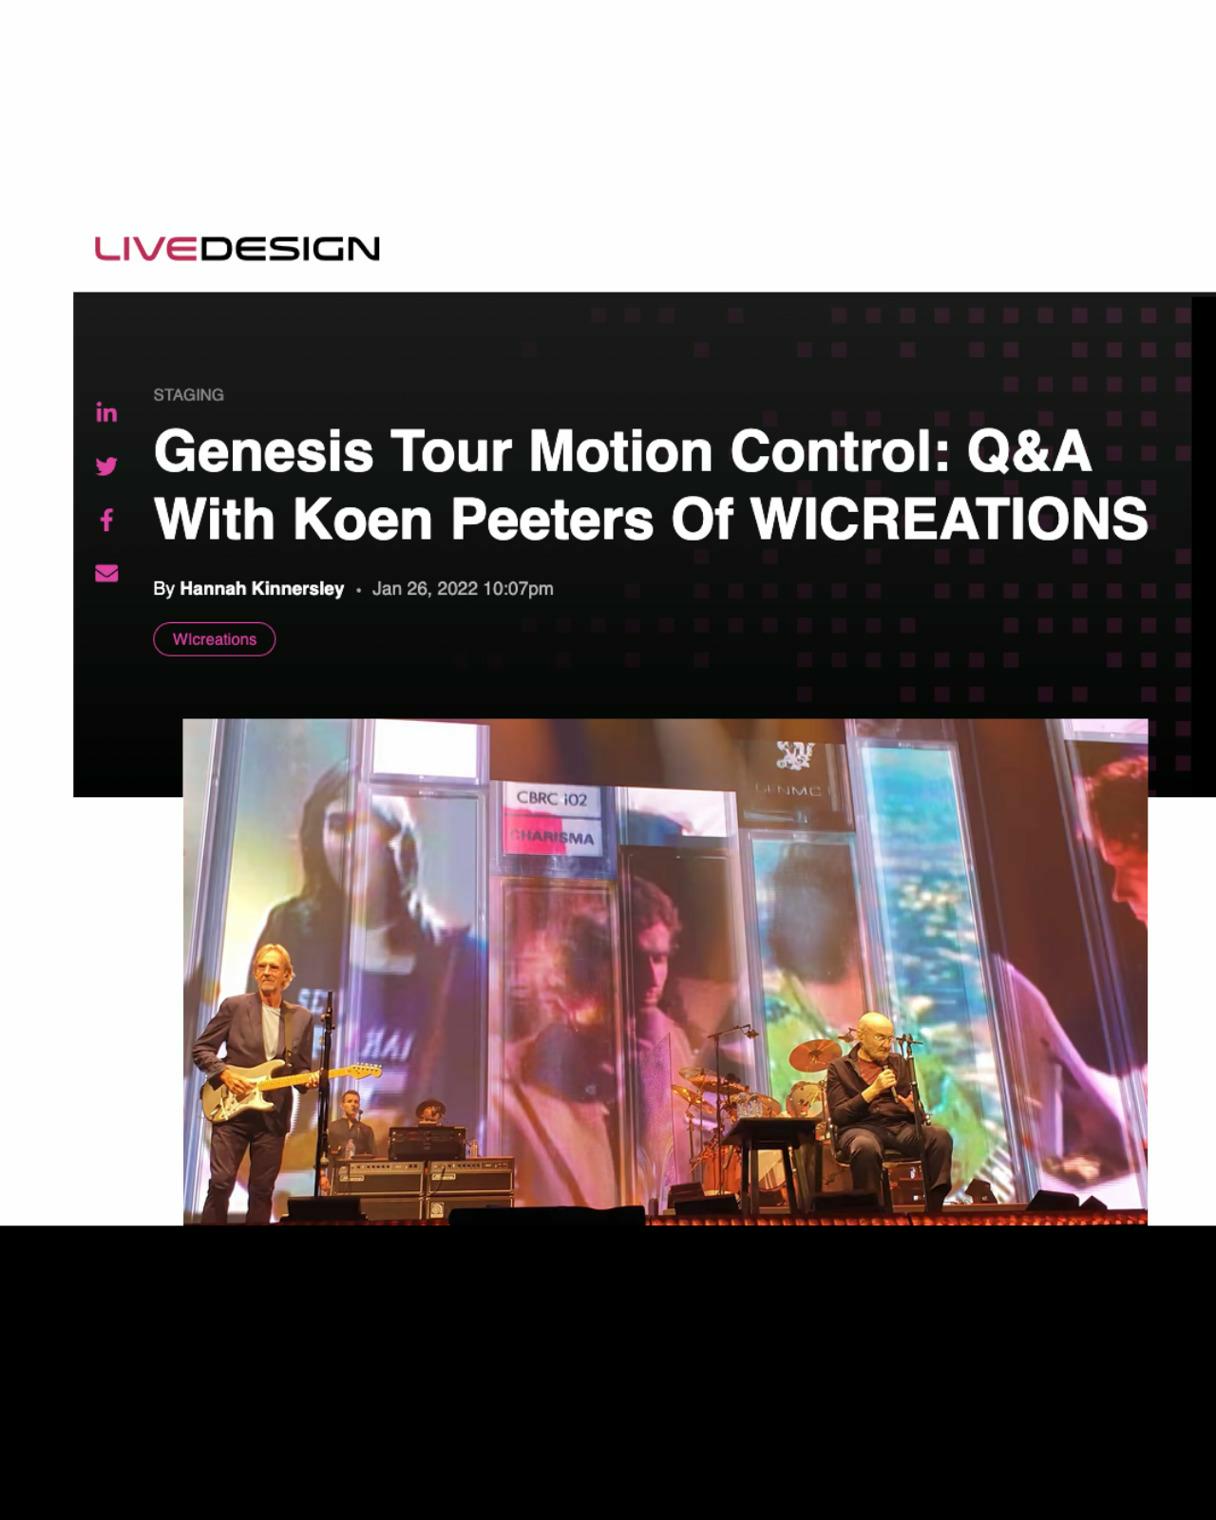 Genesis Tour Motion Control: Q&A With Koen Peeters Of WICREATIONS